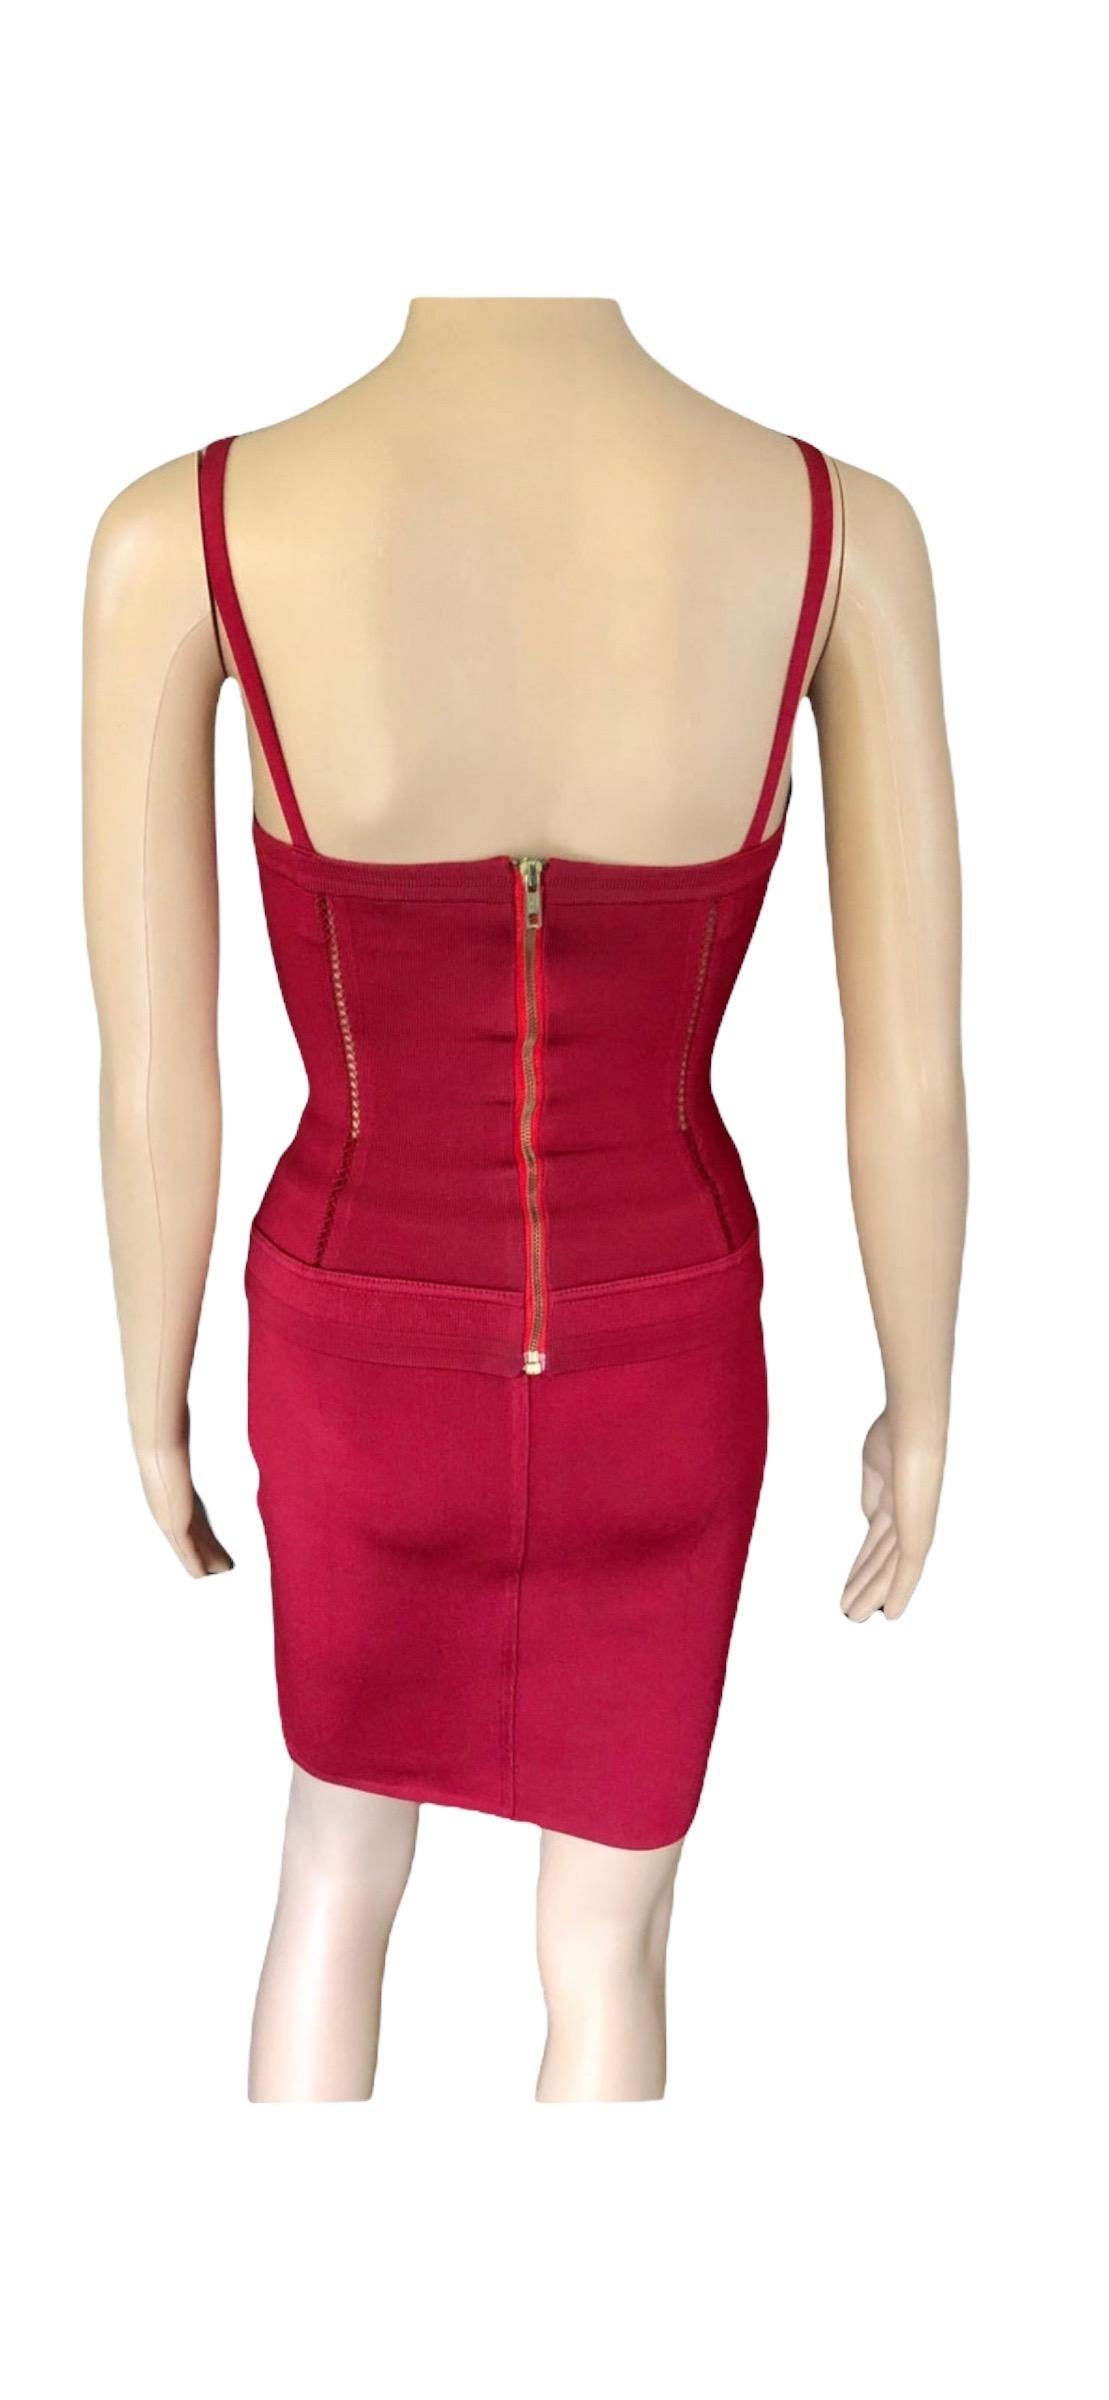 Azzedine Alaia F/W 1991 Vintage Skirt and Bustier Corset Top 2 Piece Set  For Sale 12